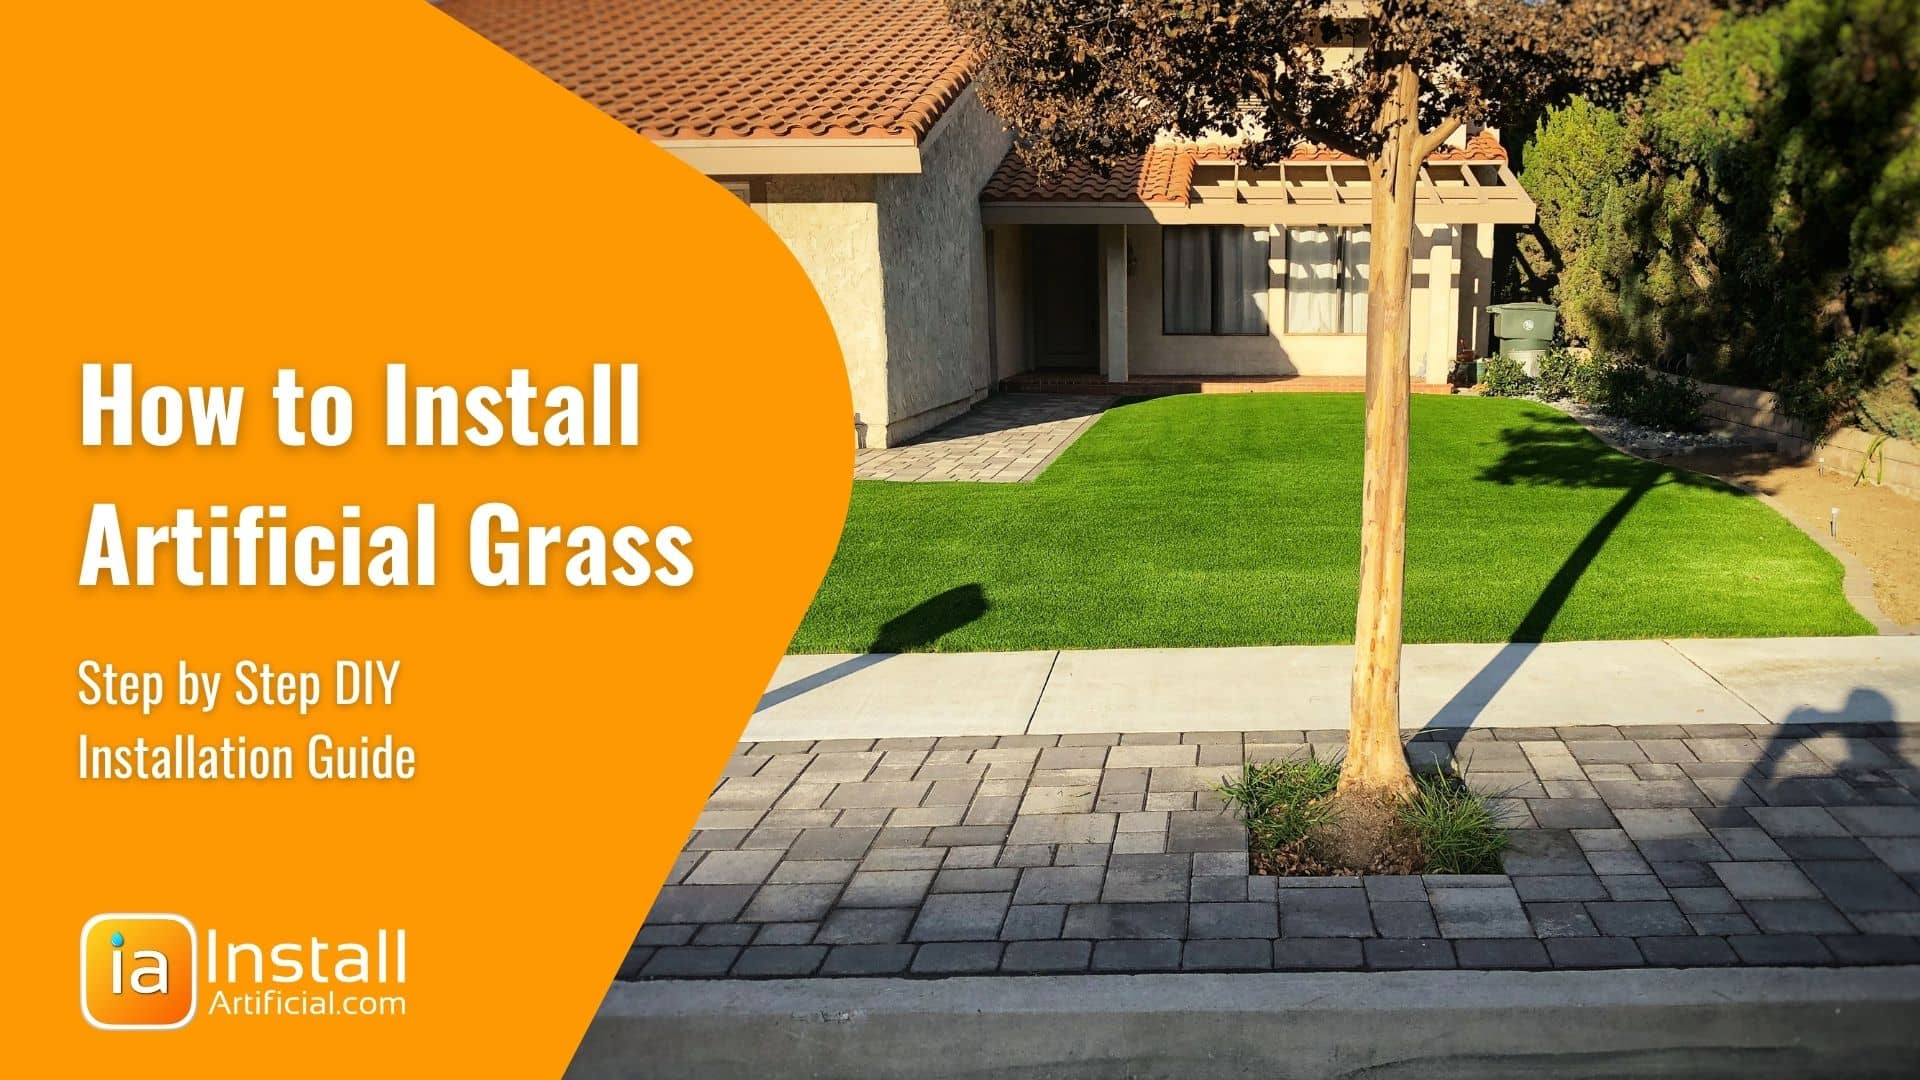 How to install artificial grass - DIY step by step guide